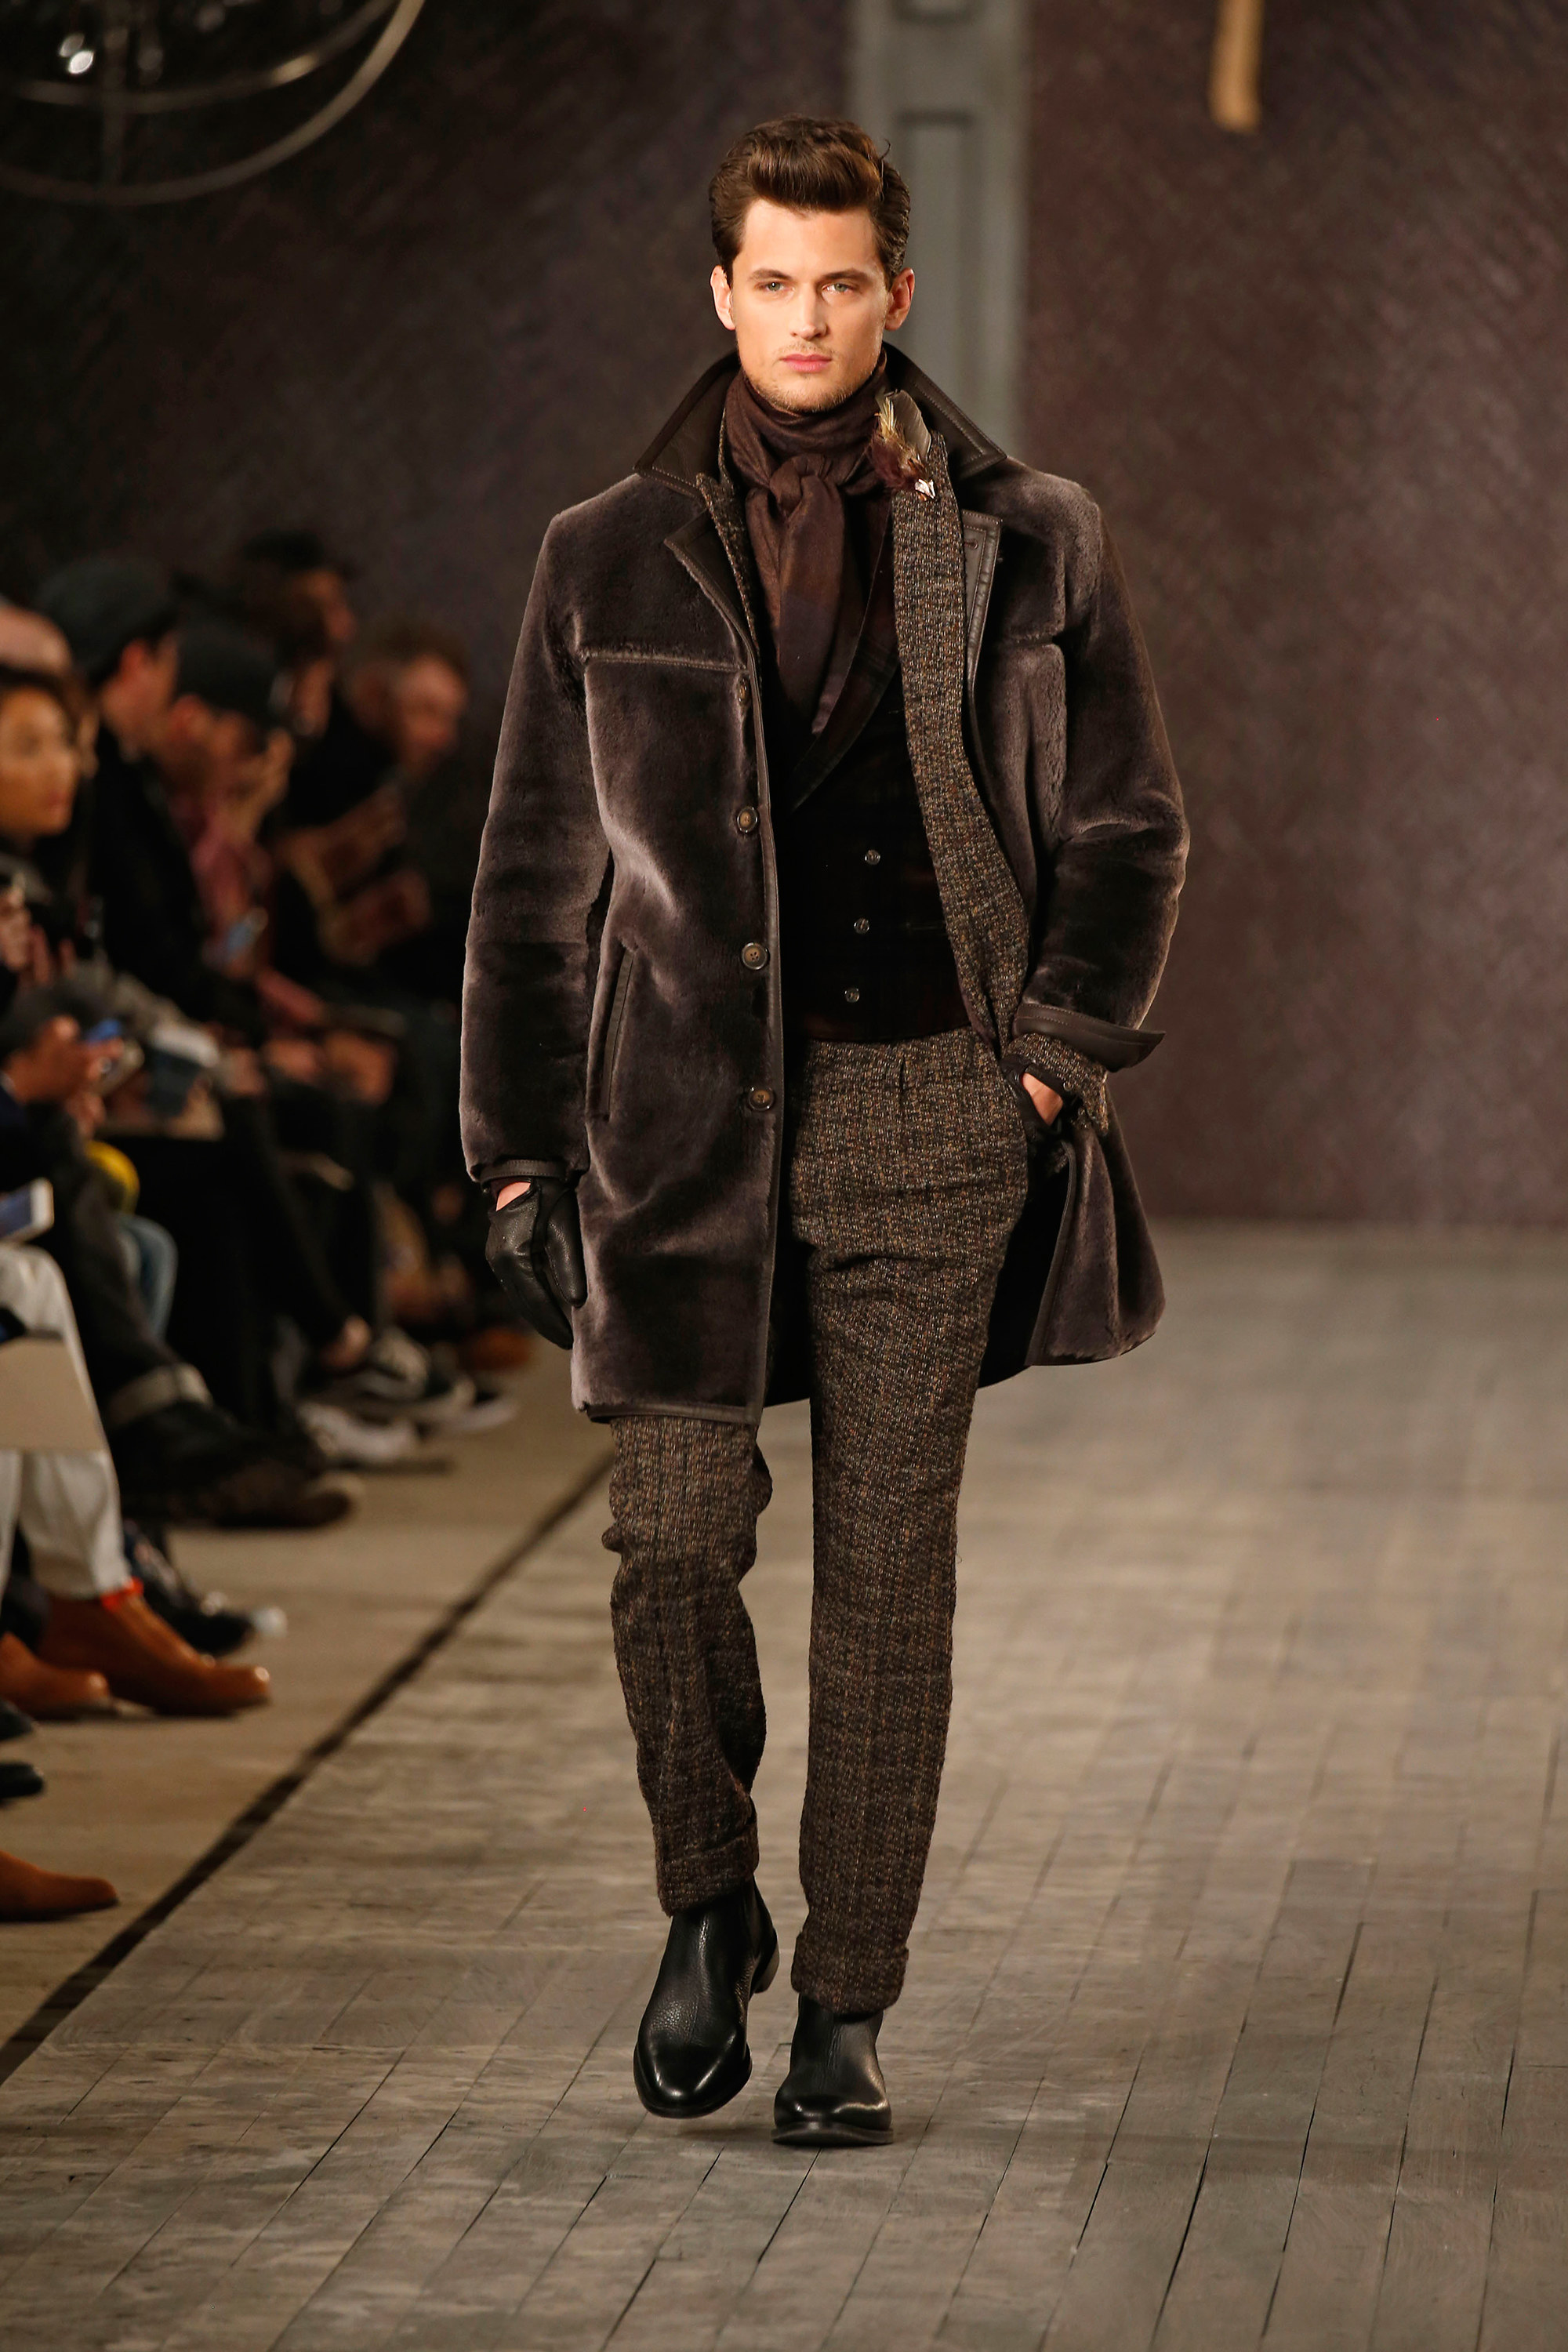 Joseph Abboud Fall 2016 cold weather fashion